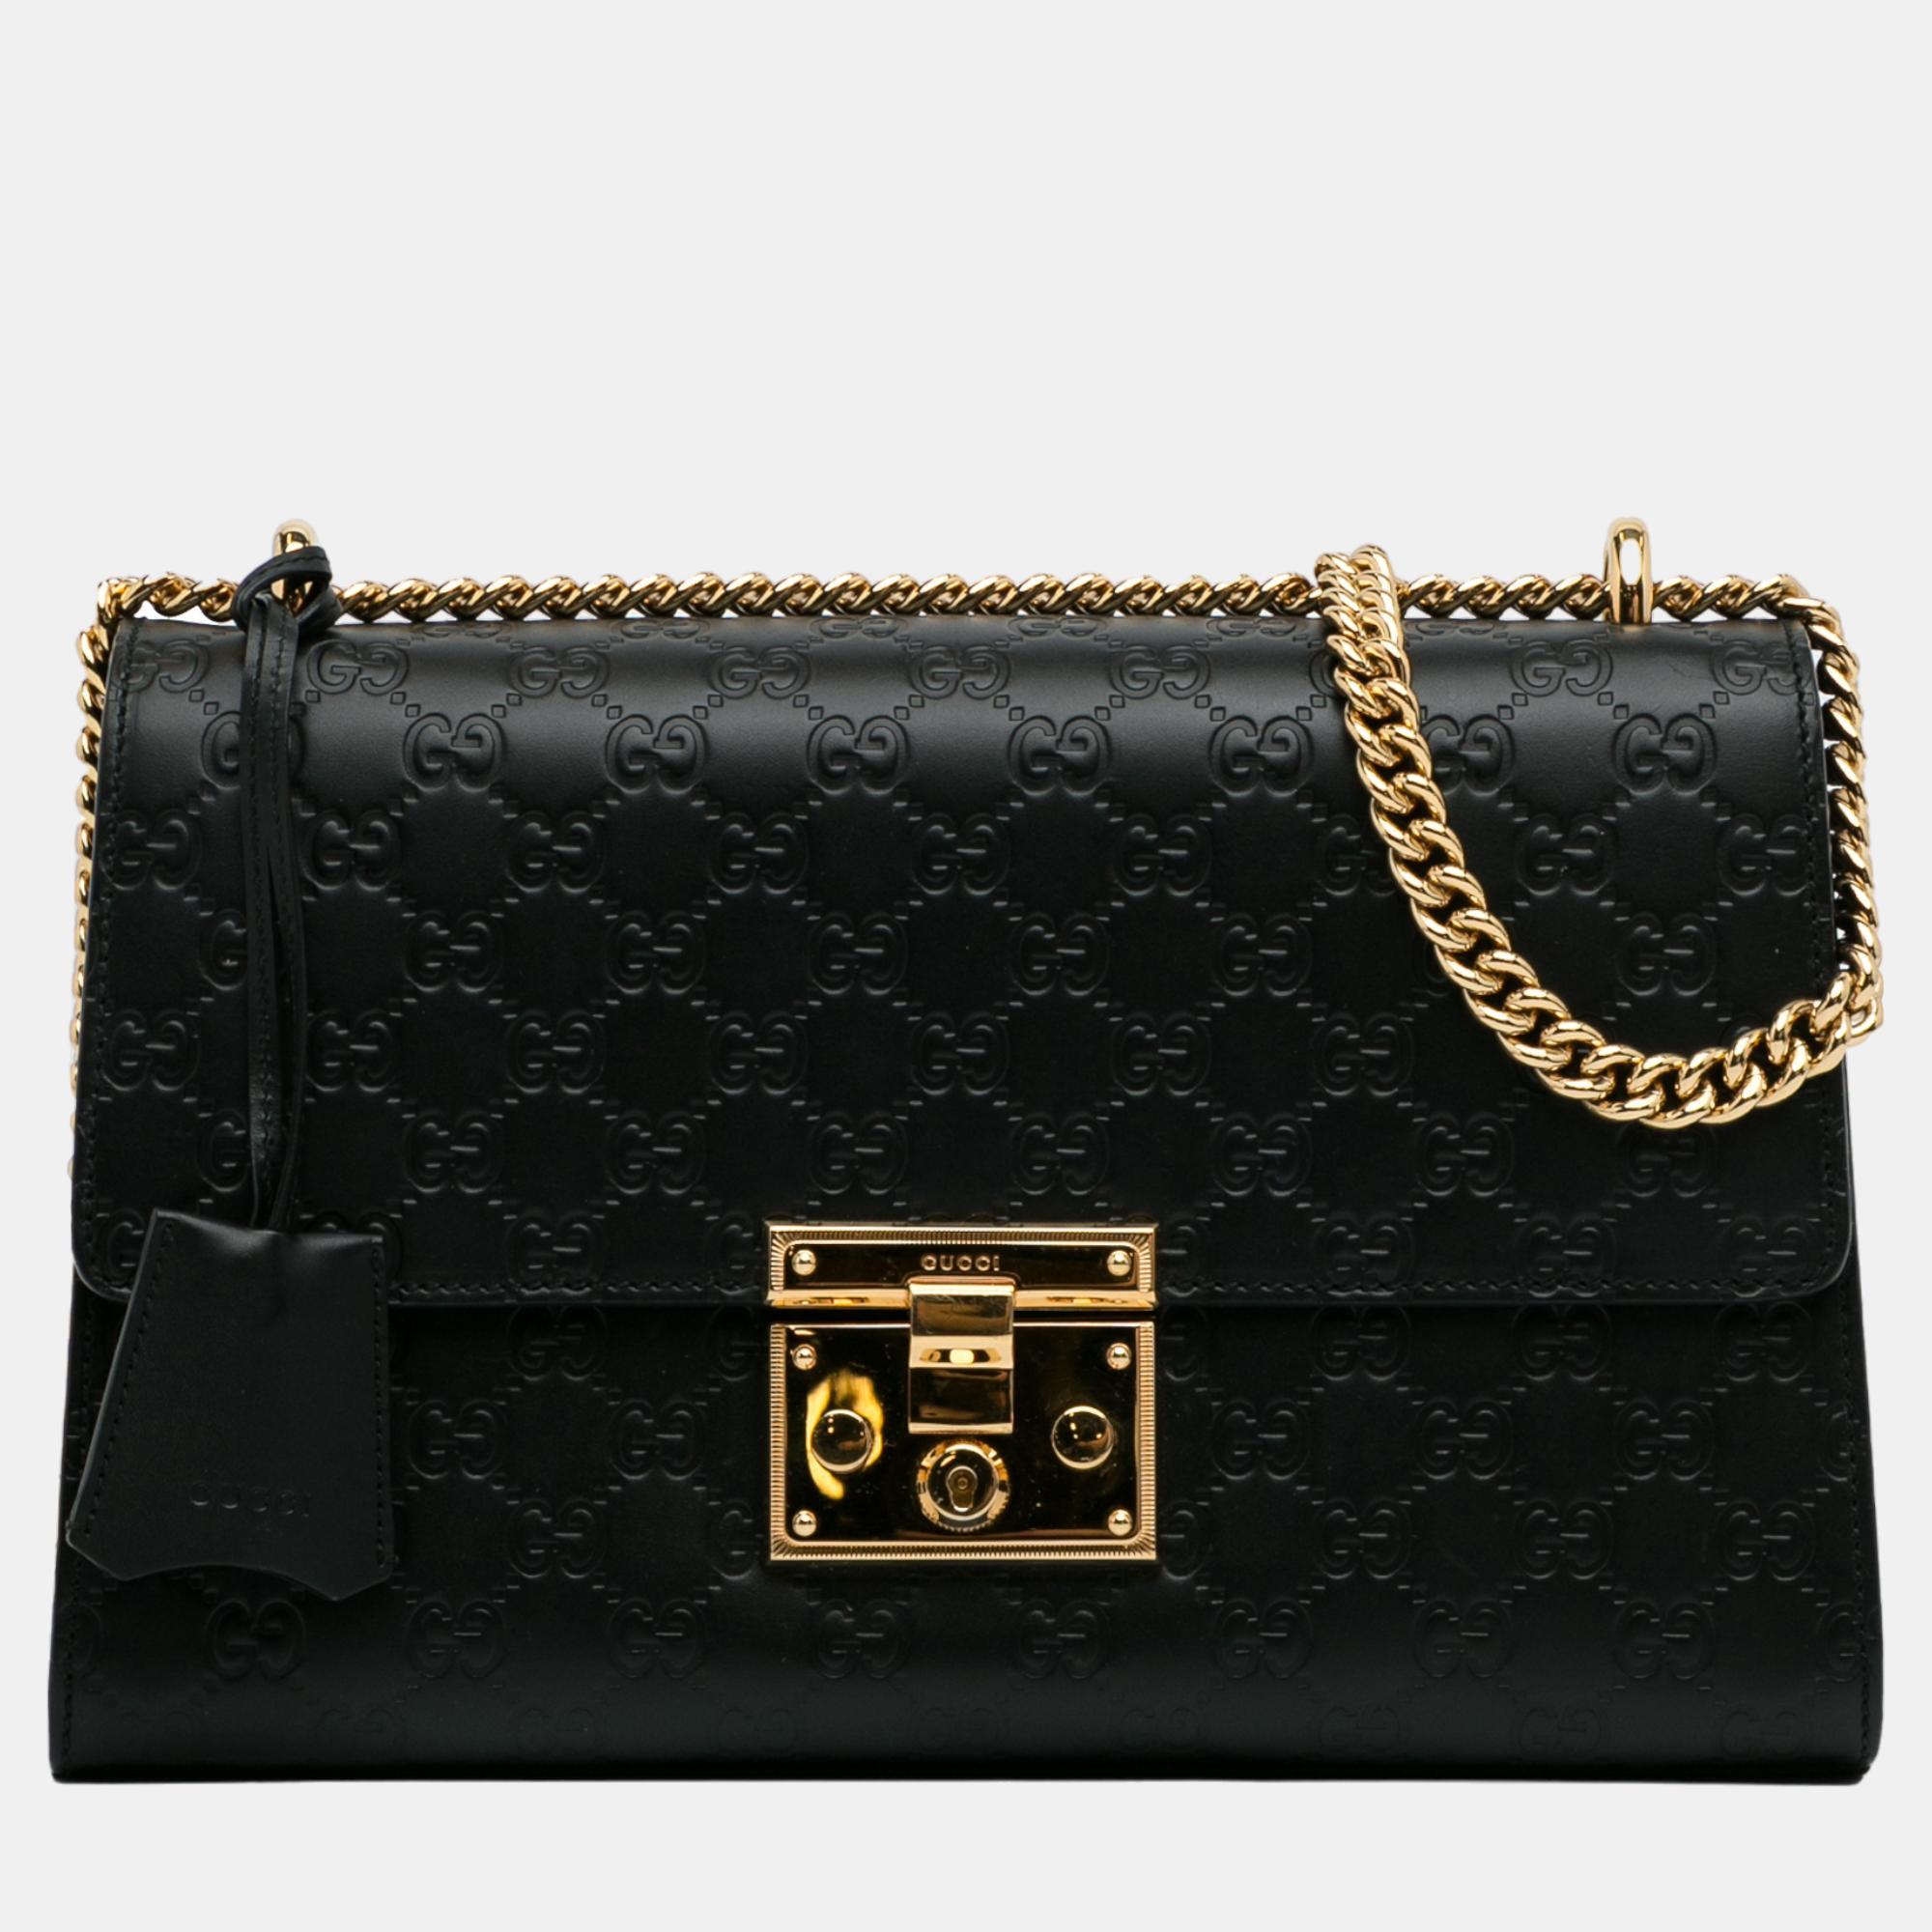 The Padlock features a leather body gold tone chain straps a top flap with push lock closure an exterior slip pocket and interior zip and slip pockets.